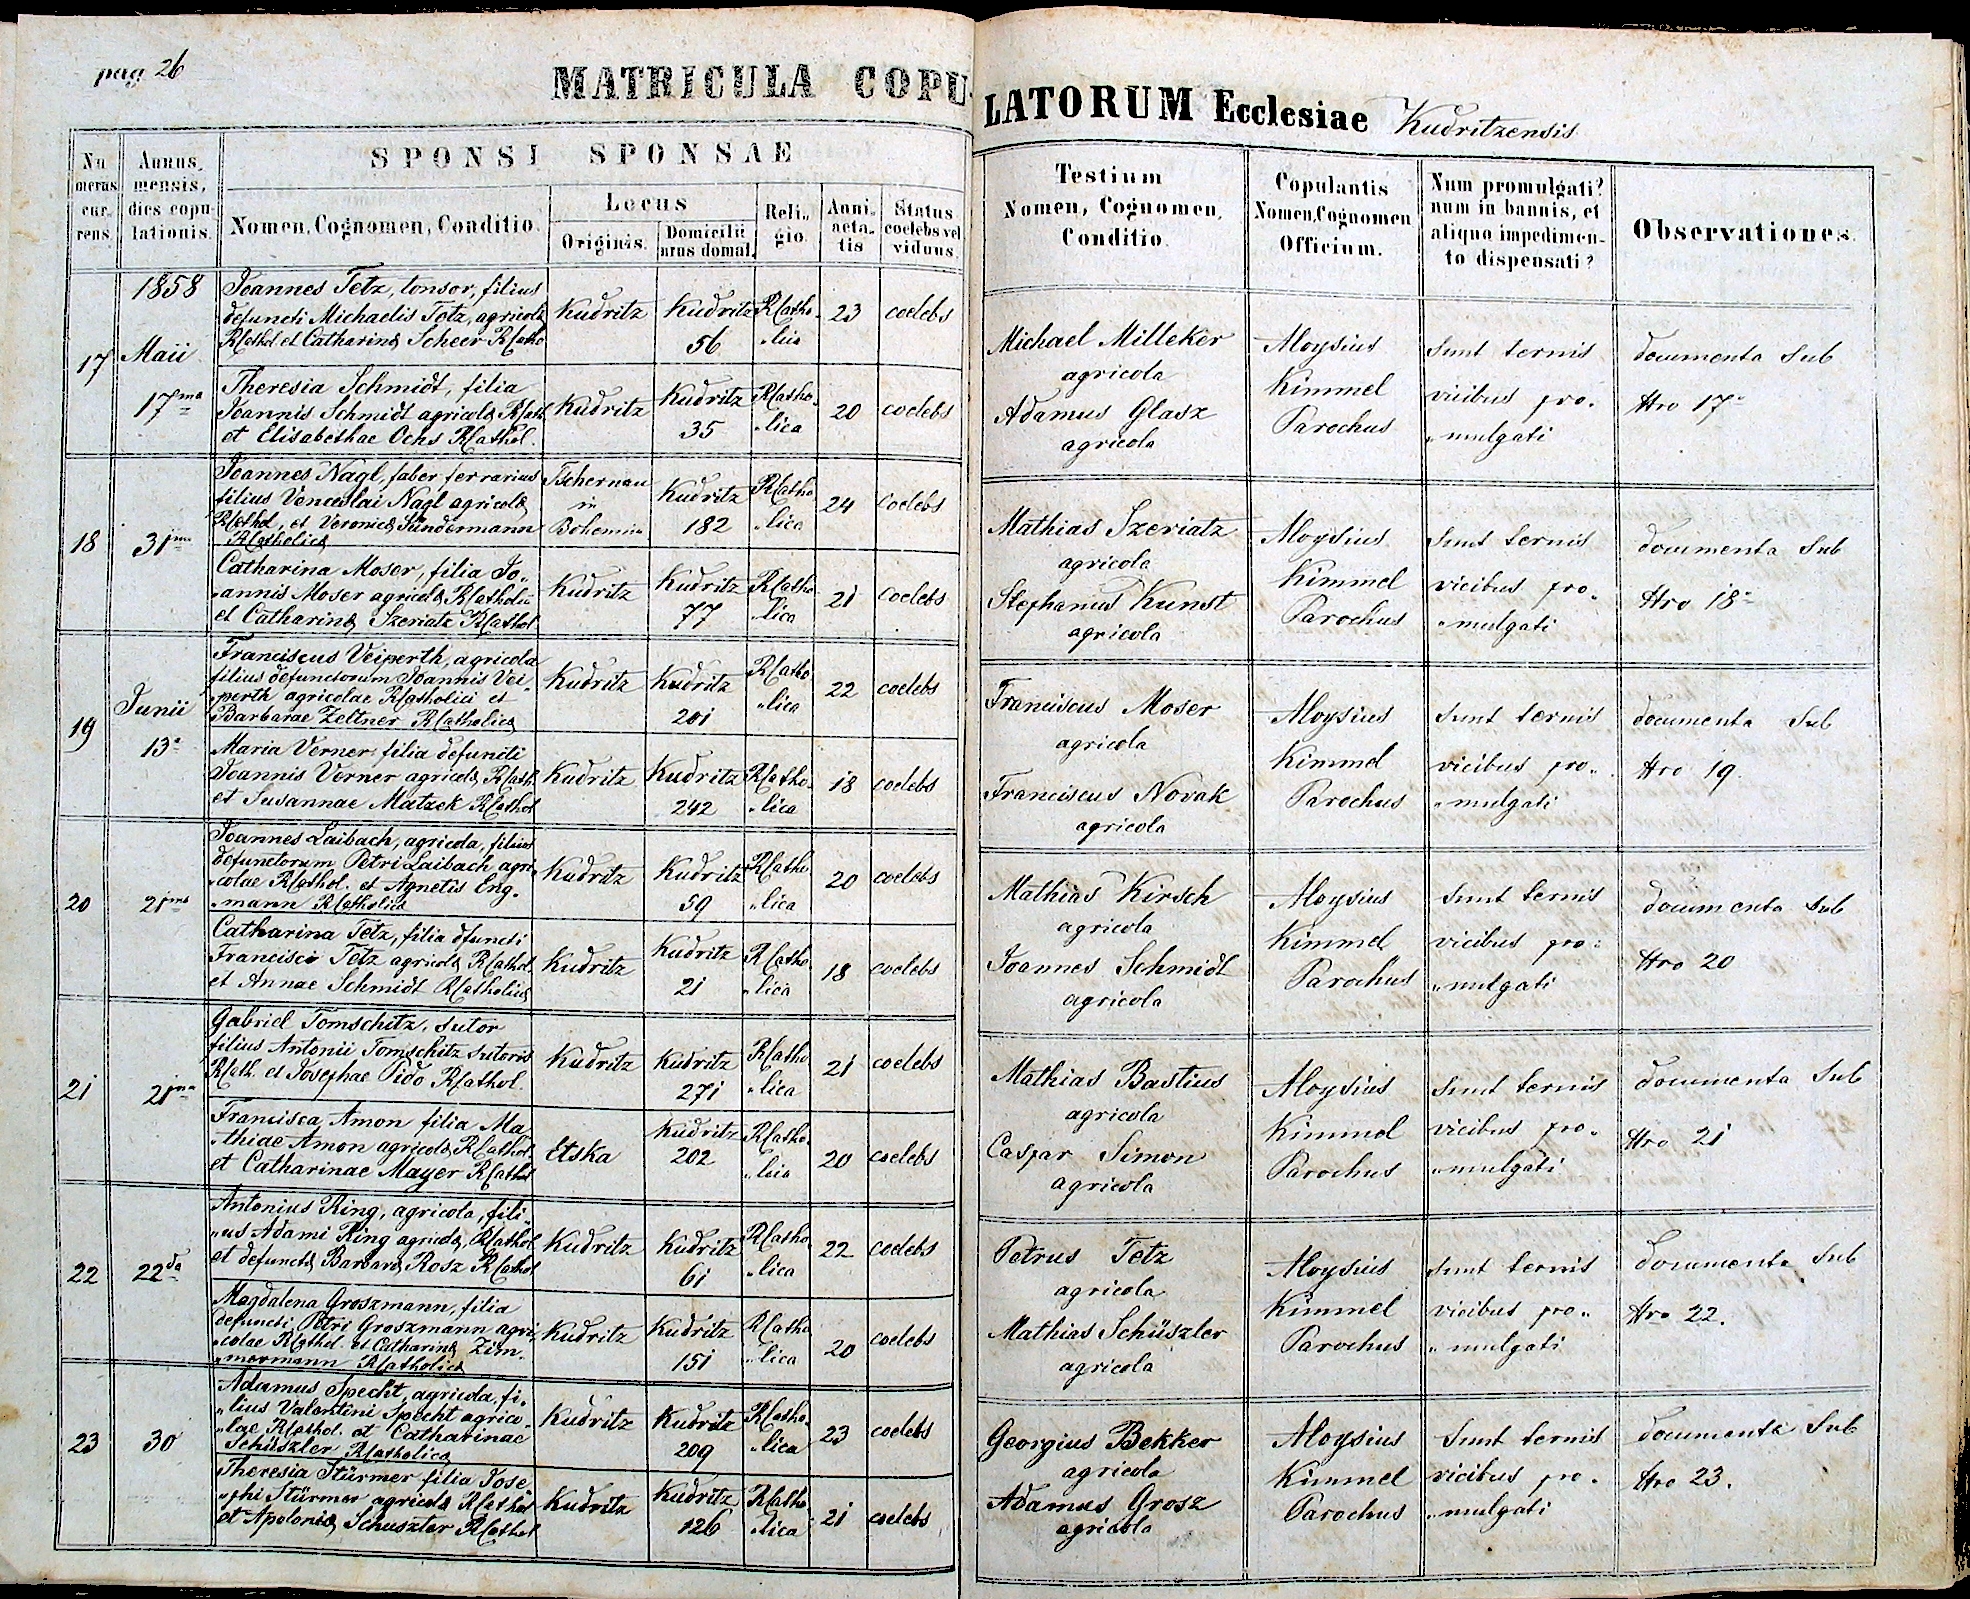 images/church_records/MARRIAGES/1871-1890M/026